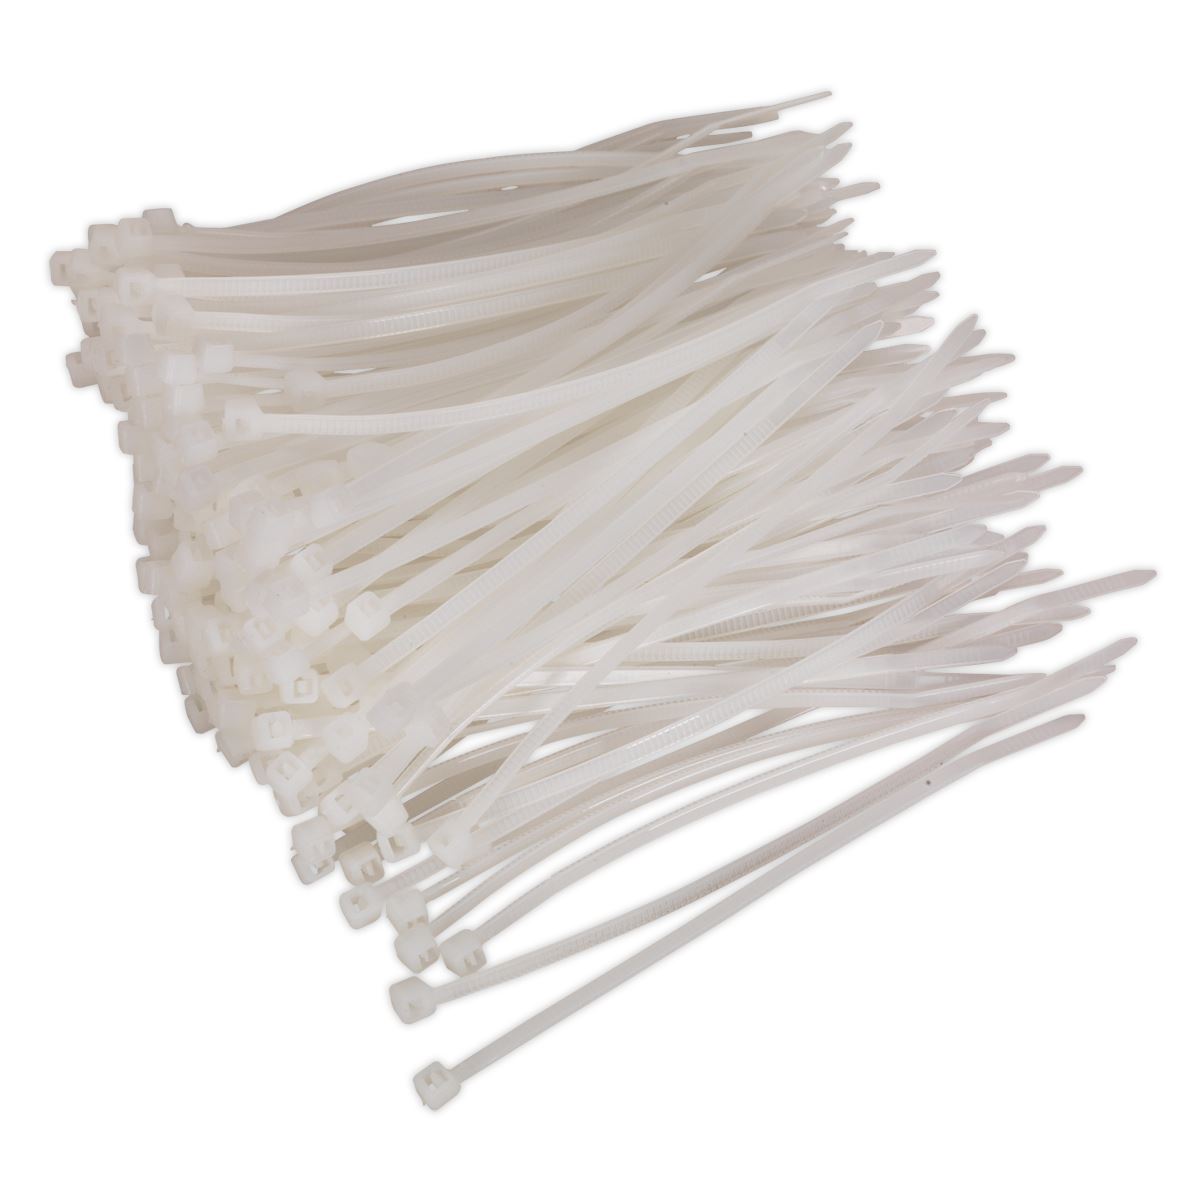 Sealey Cable Tie 100 x 2.5mm White Pack of 200 CT10025P200W